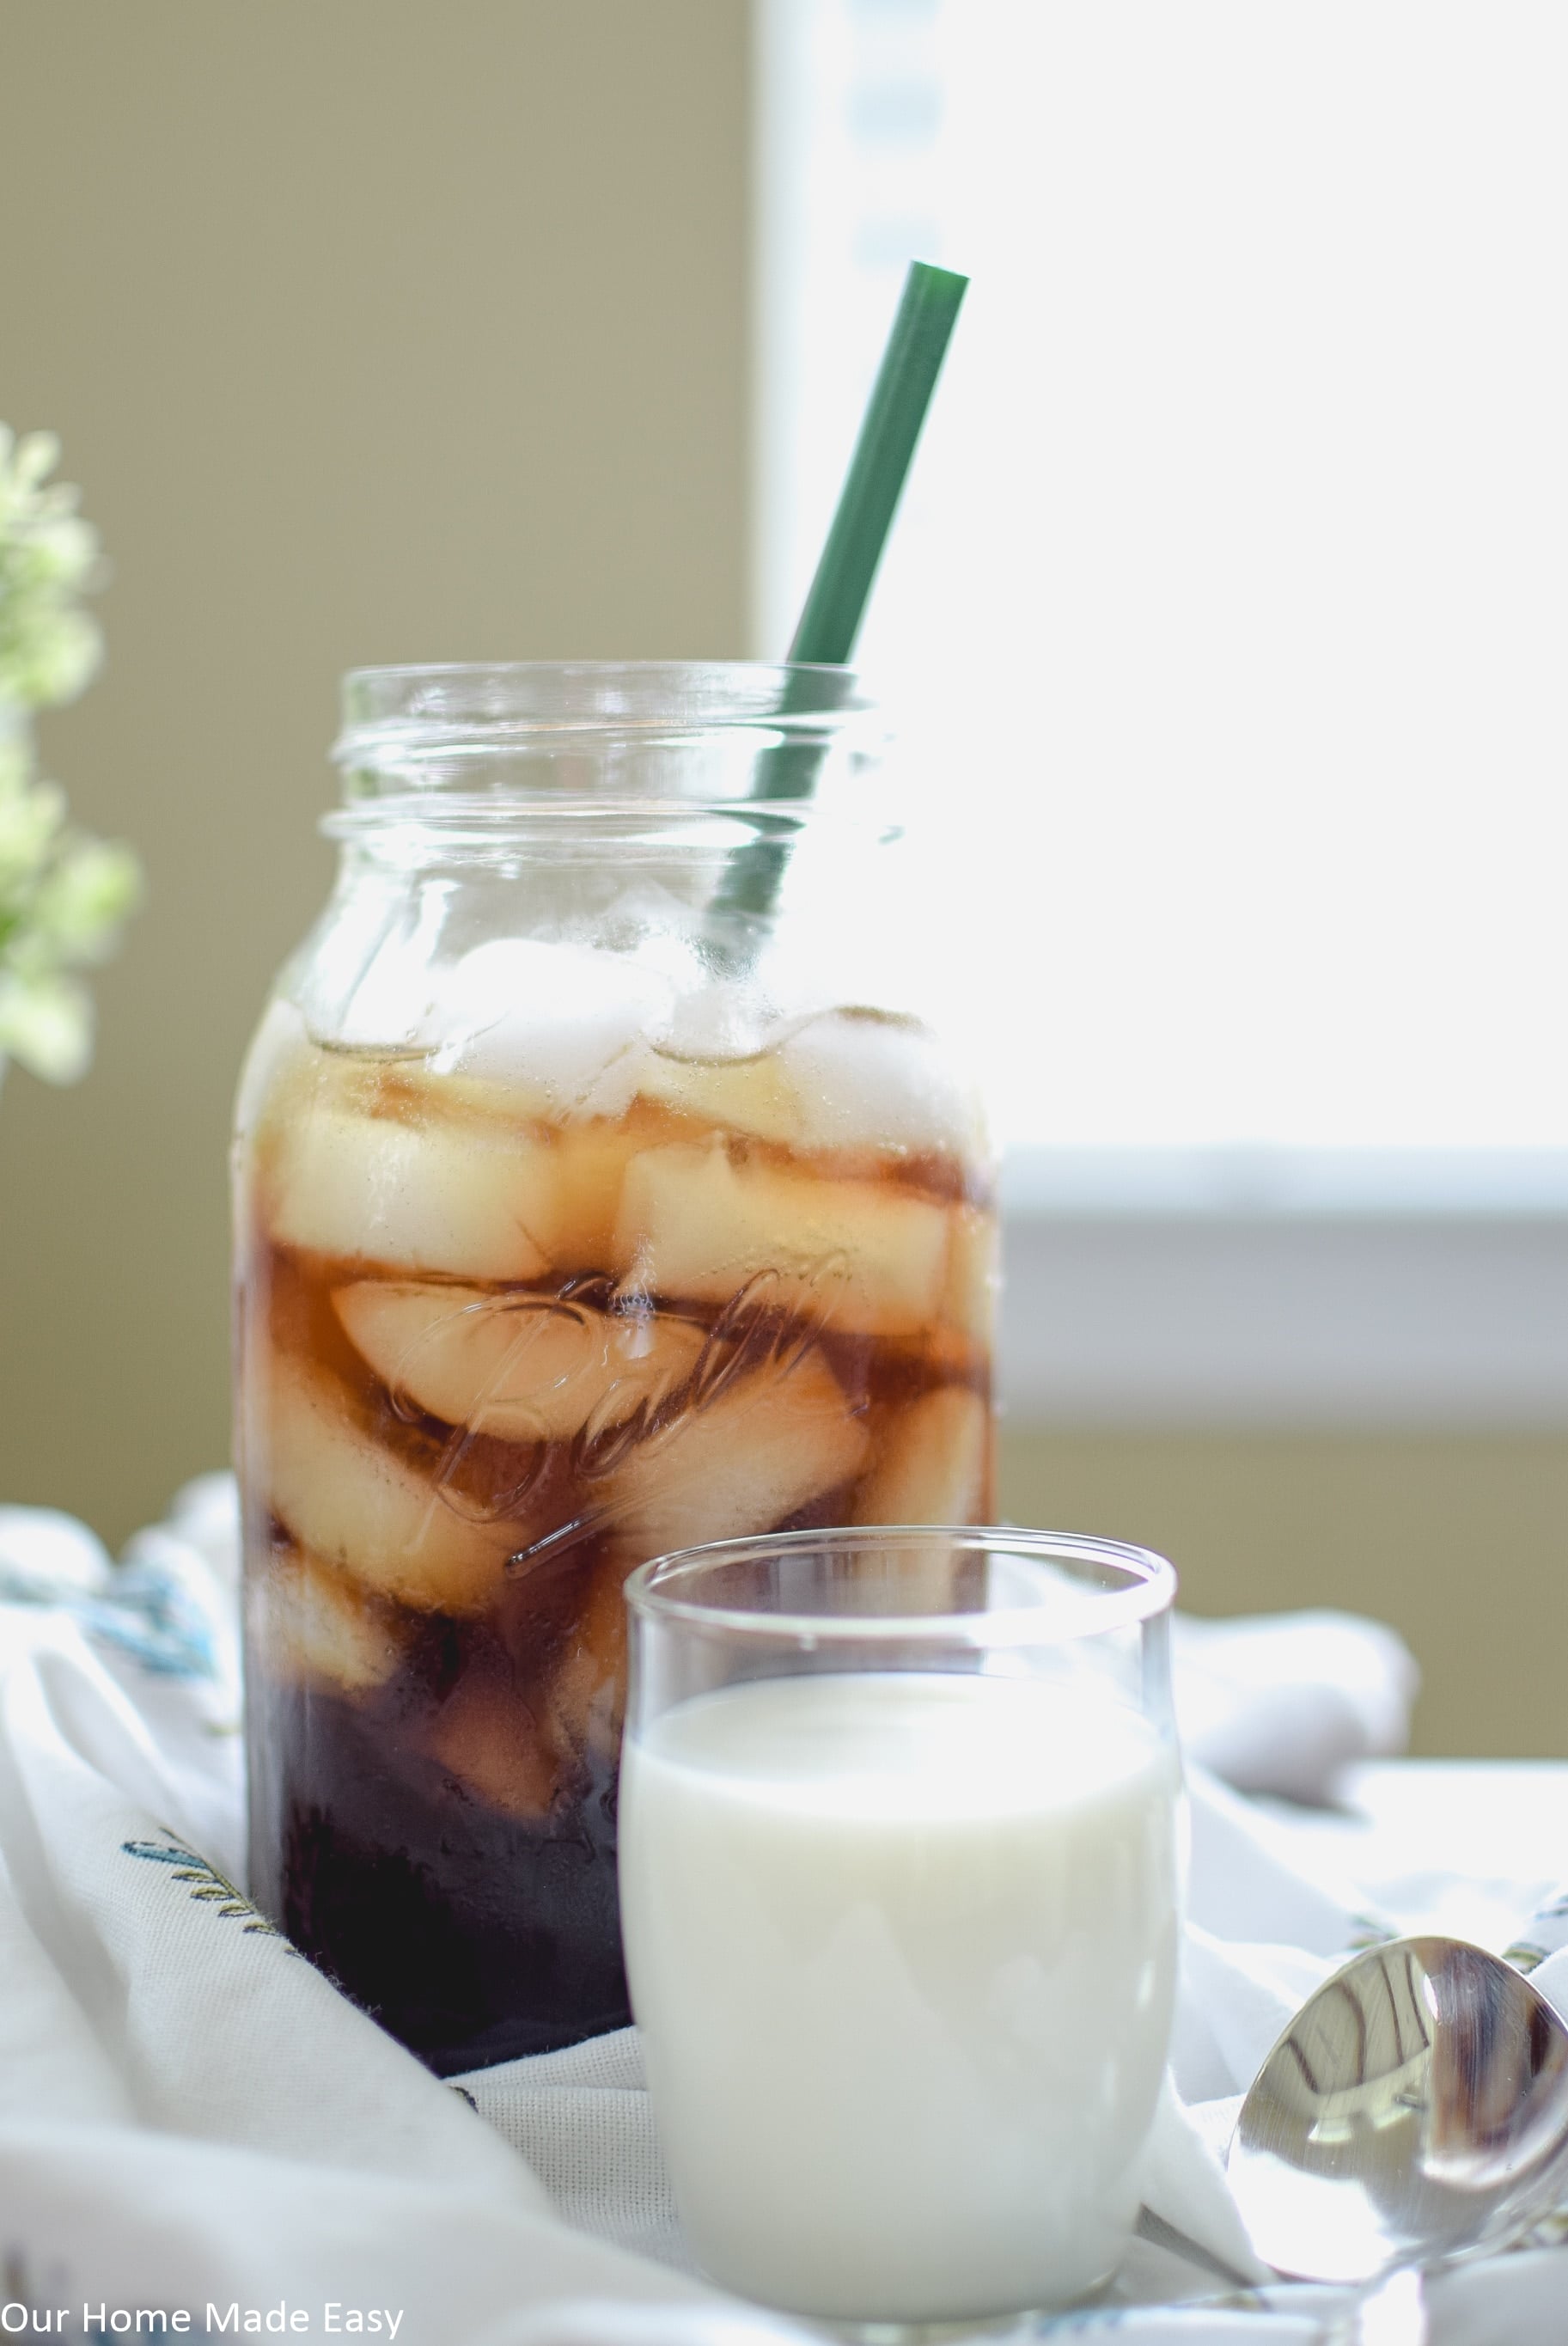 How To Make Cold Brew Coffee At Home - The Dinner Bite